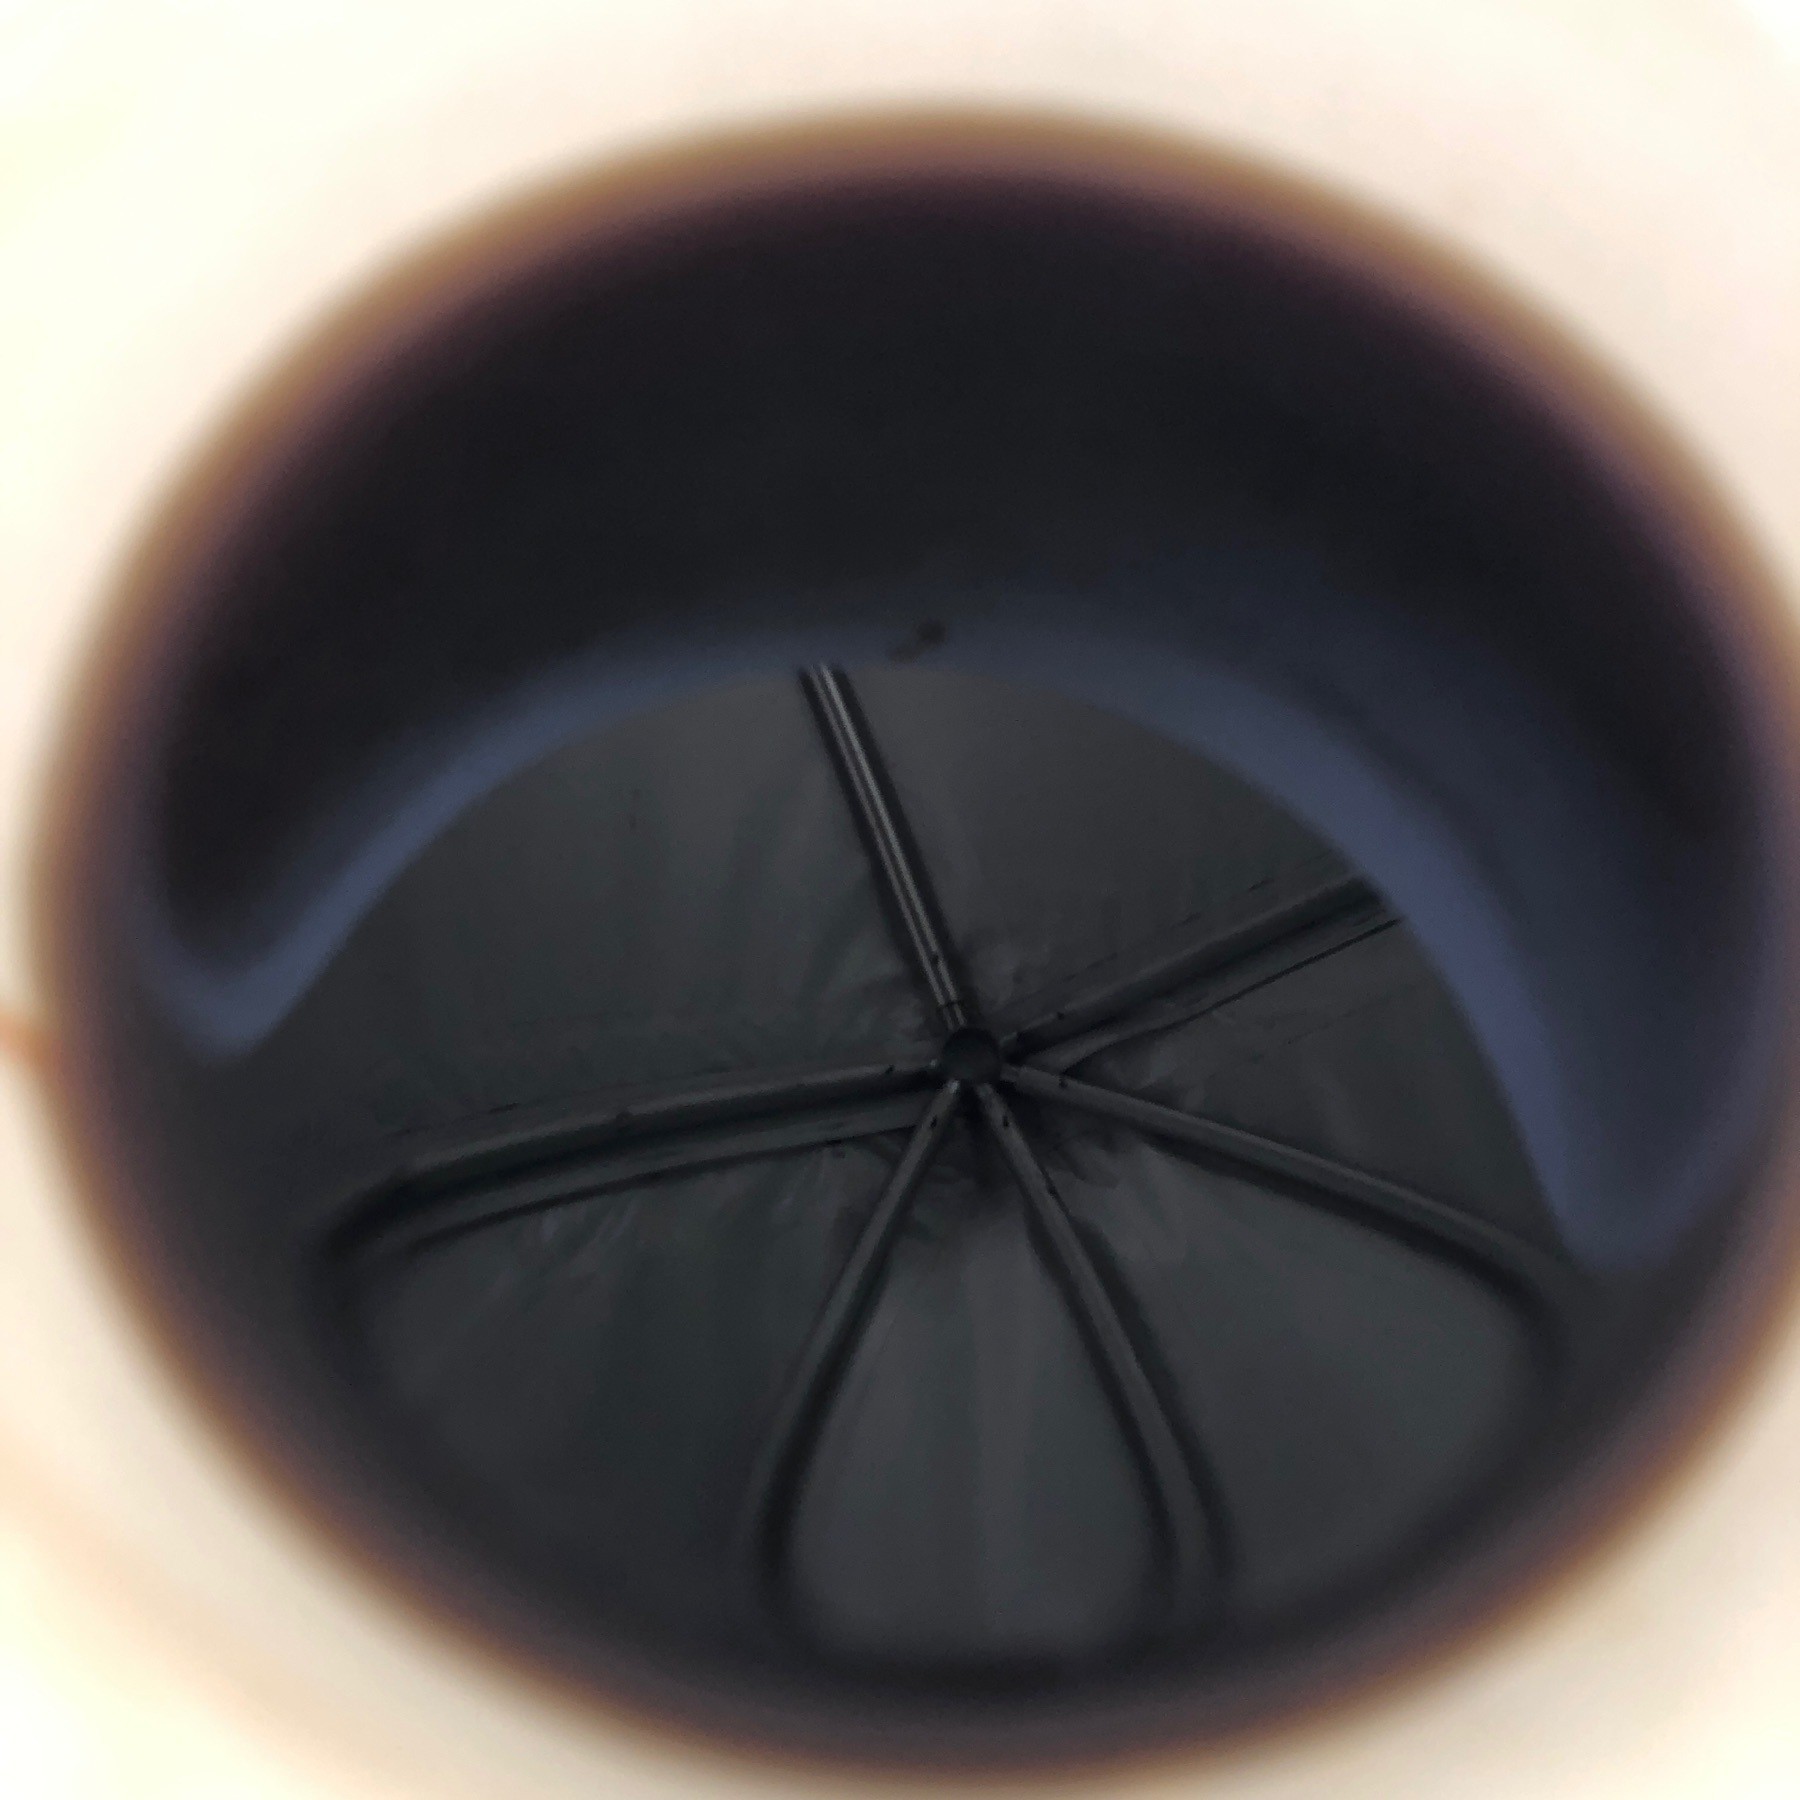 Inside of tent reflected in coffee in cup.